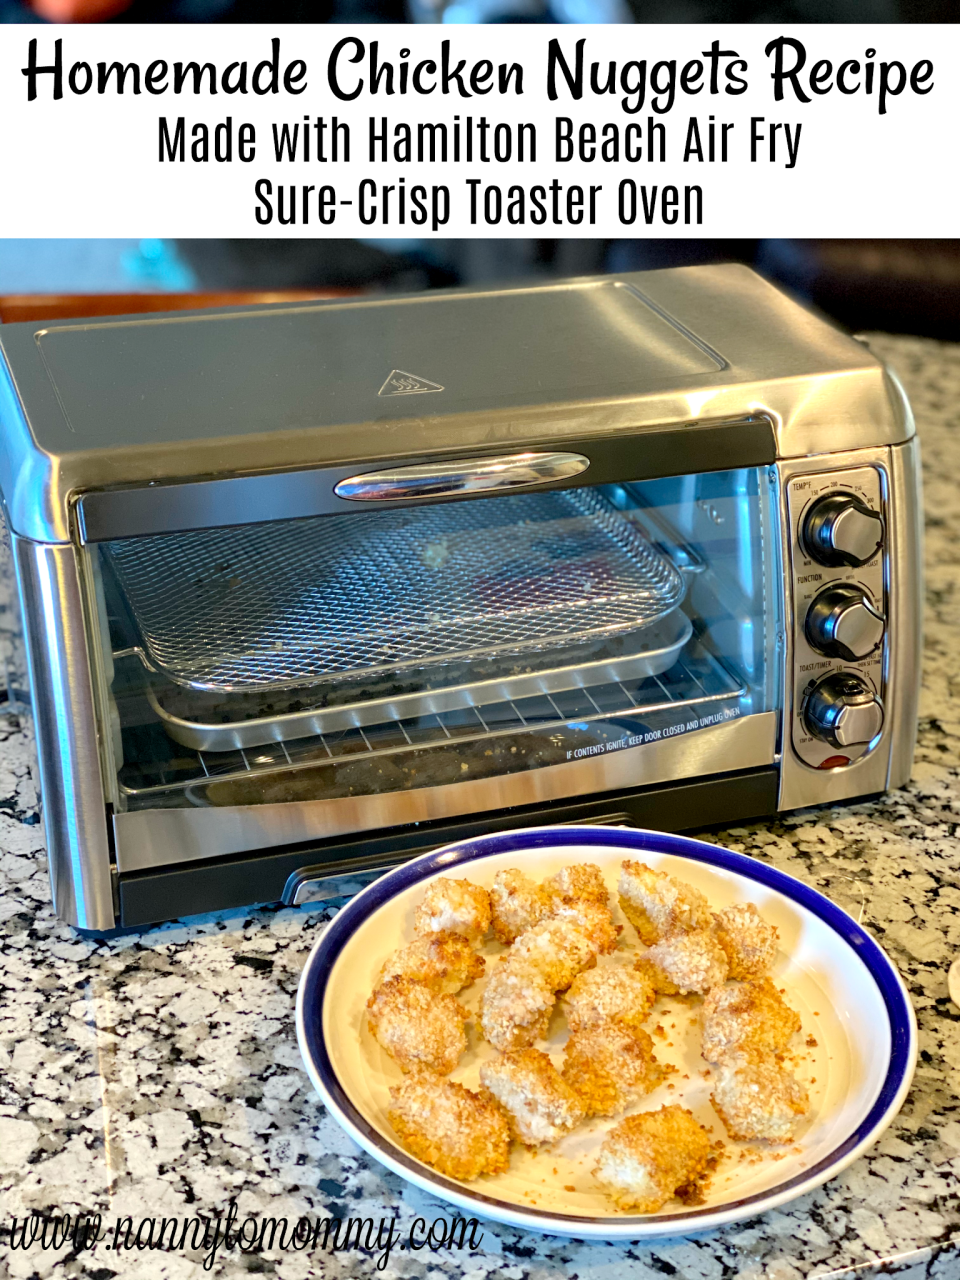 What Dishes Can Be Used In A Toaster Oven